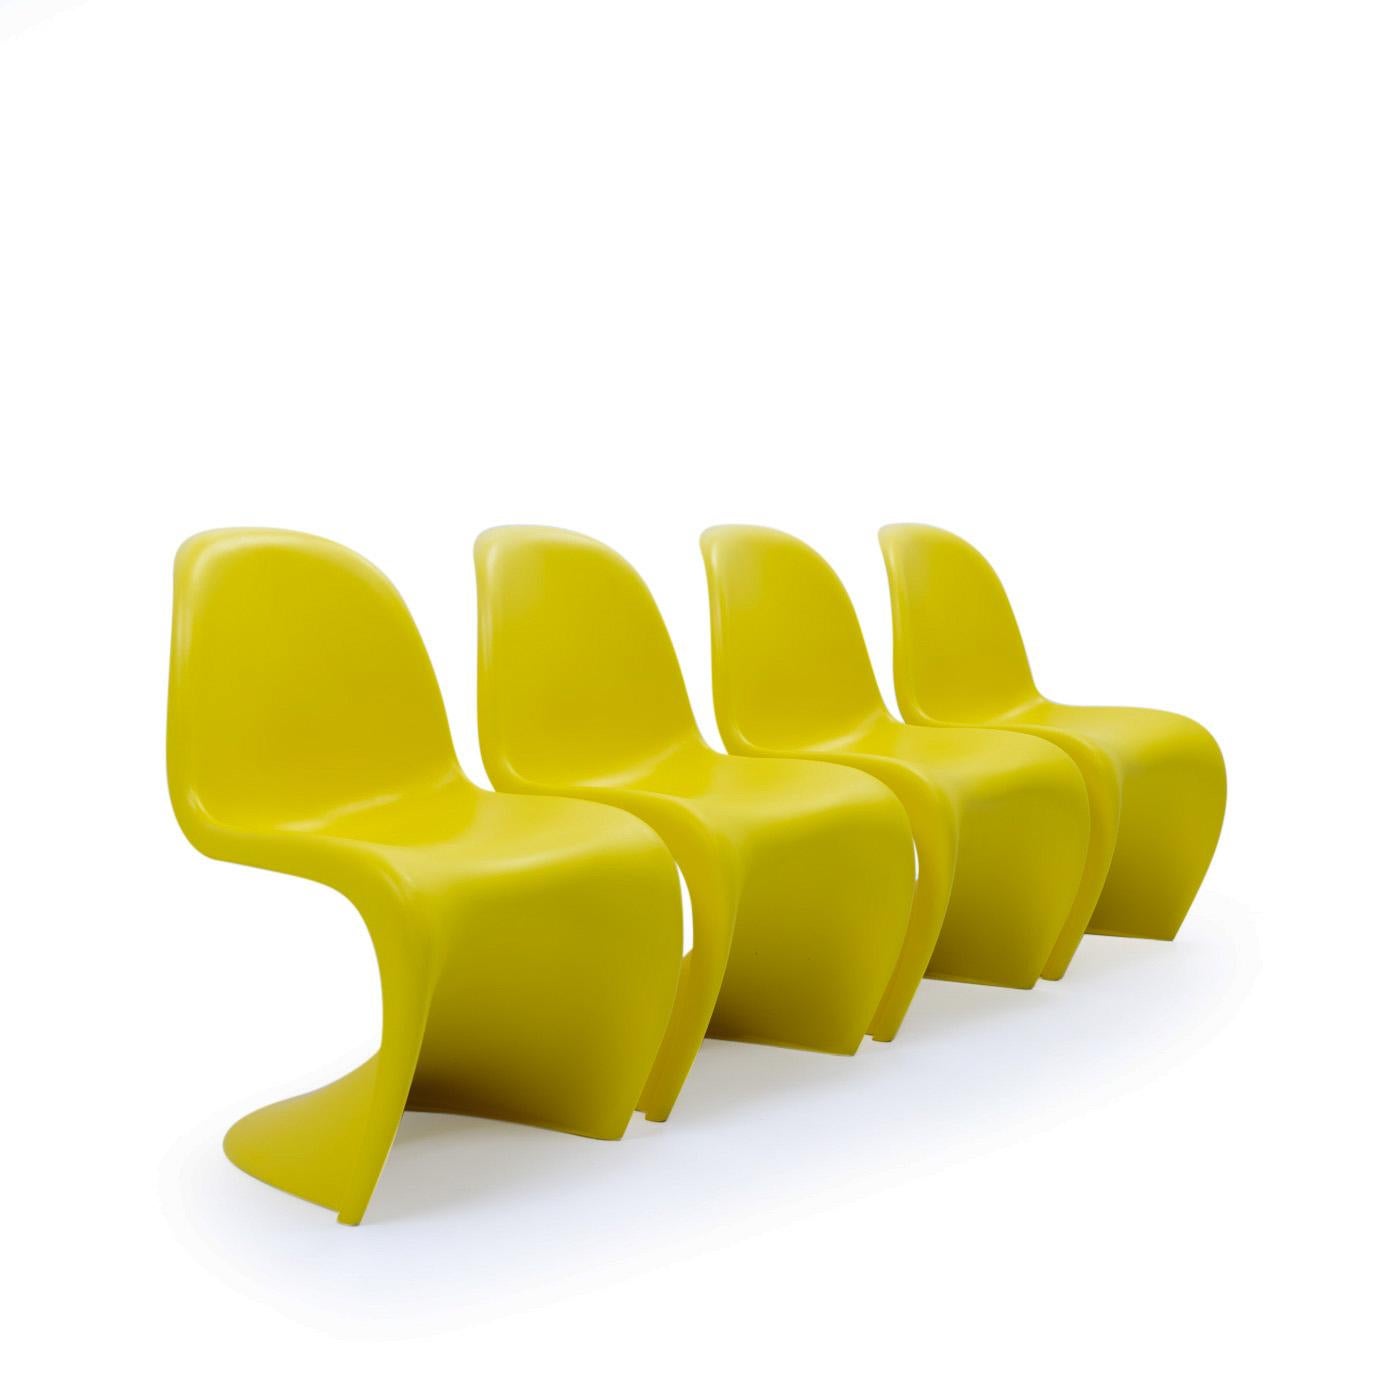 Mid-Century Modern Verner Panton Chairs, Yellow by Vitra, 2000s